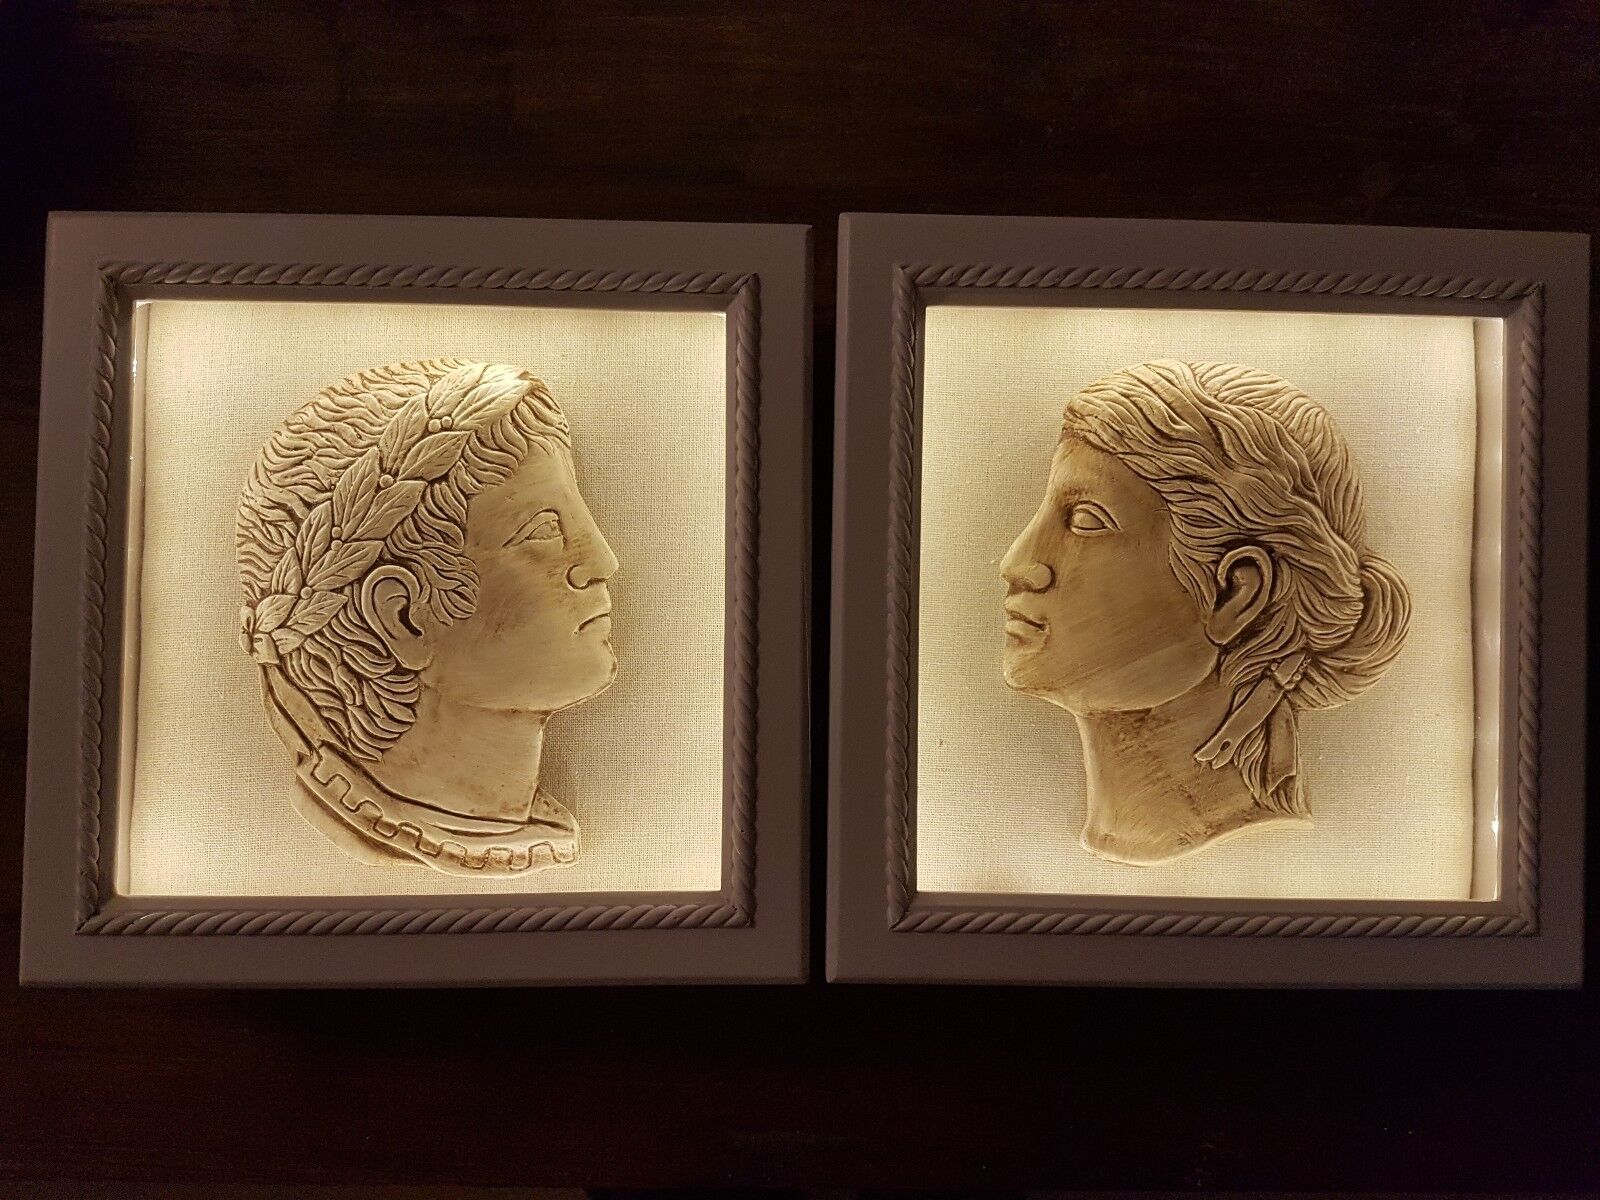 2 Lady Gent portrait In ribbed Wall Display Cabinet Box Frame With Led Lighting